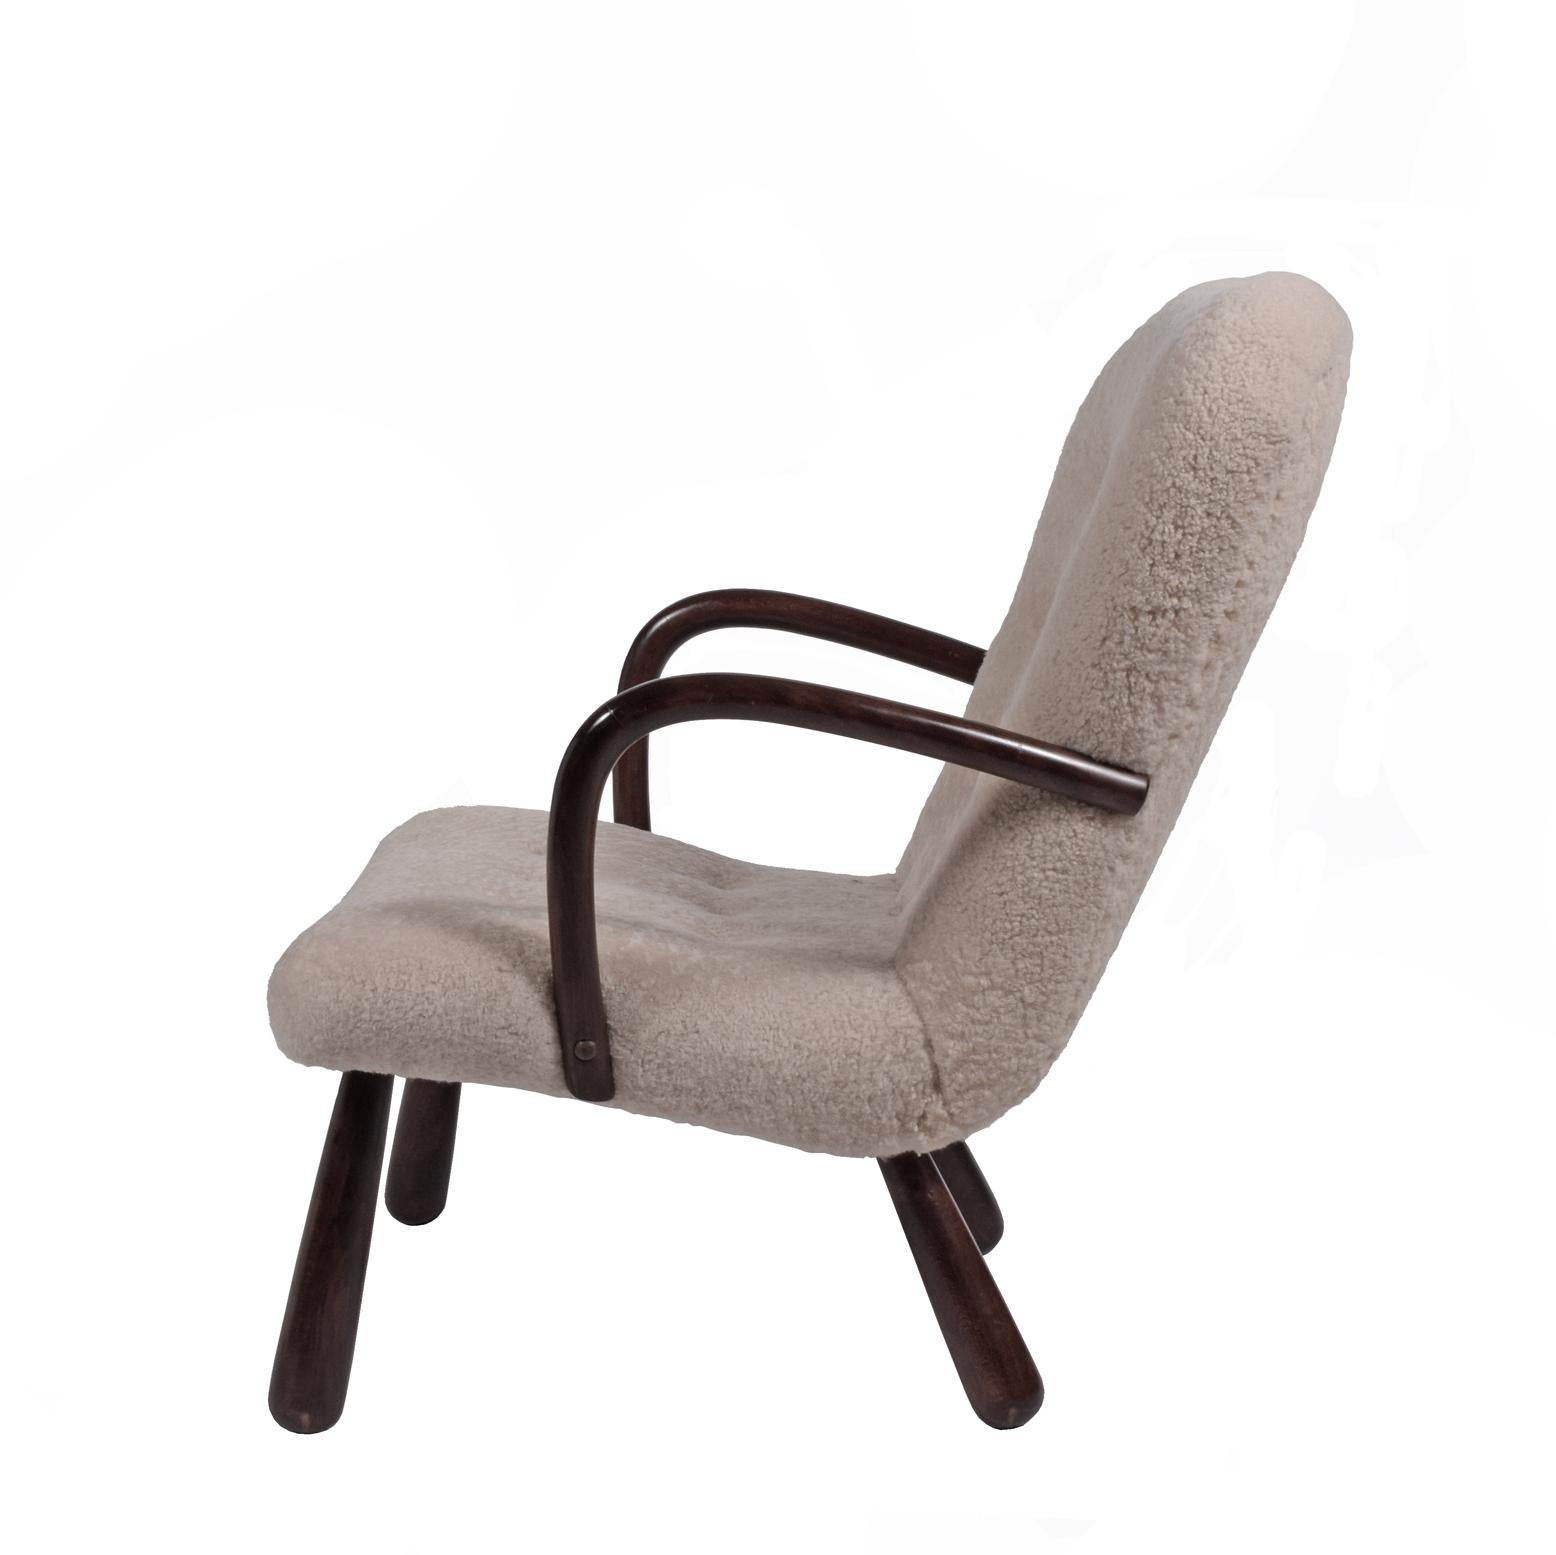 Stained Beachwood lounge chair with club shaped legs and curved armrests. This model was produced in the 1950s by Ikea named 'Åke' and has been attributed to Philip Arctander.